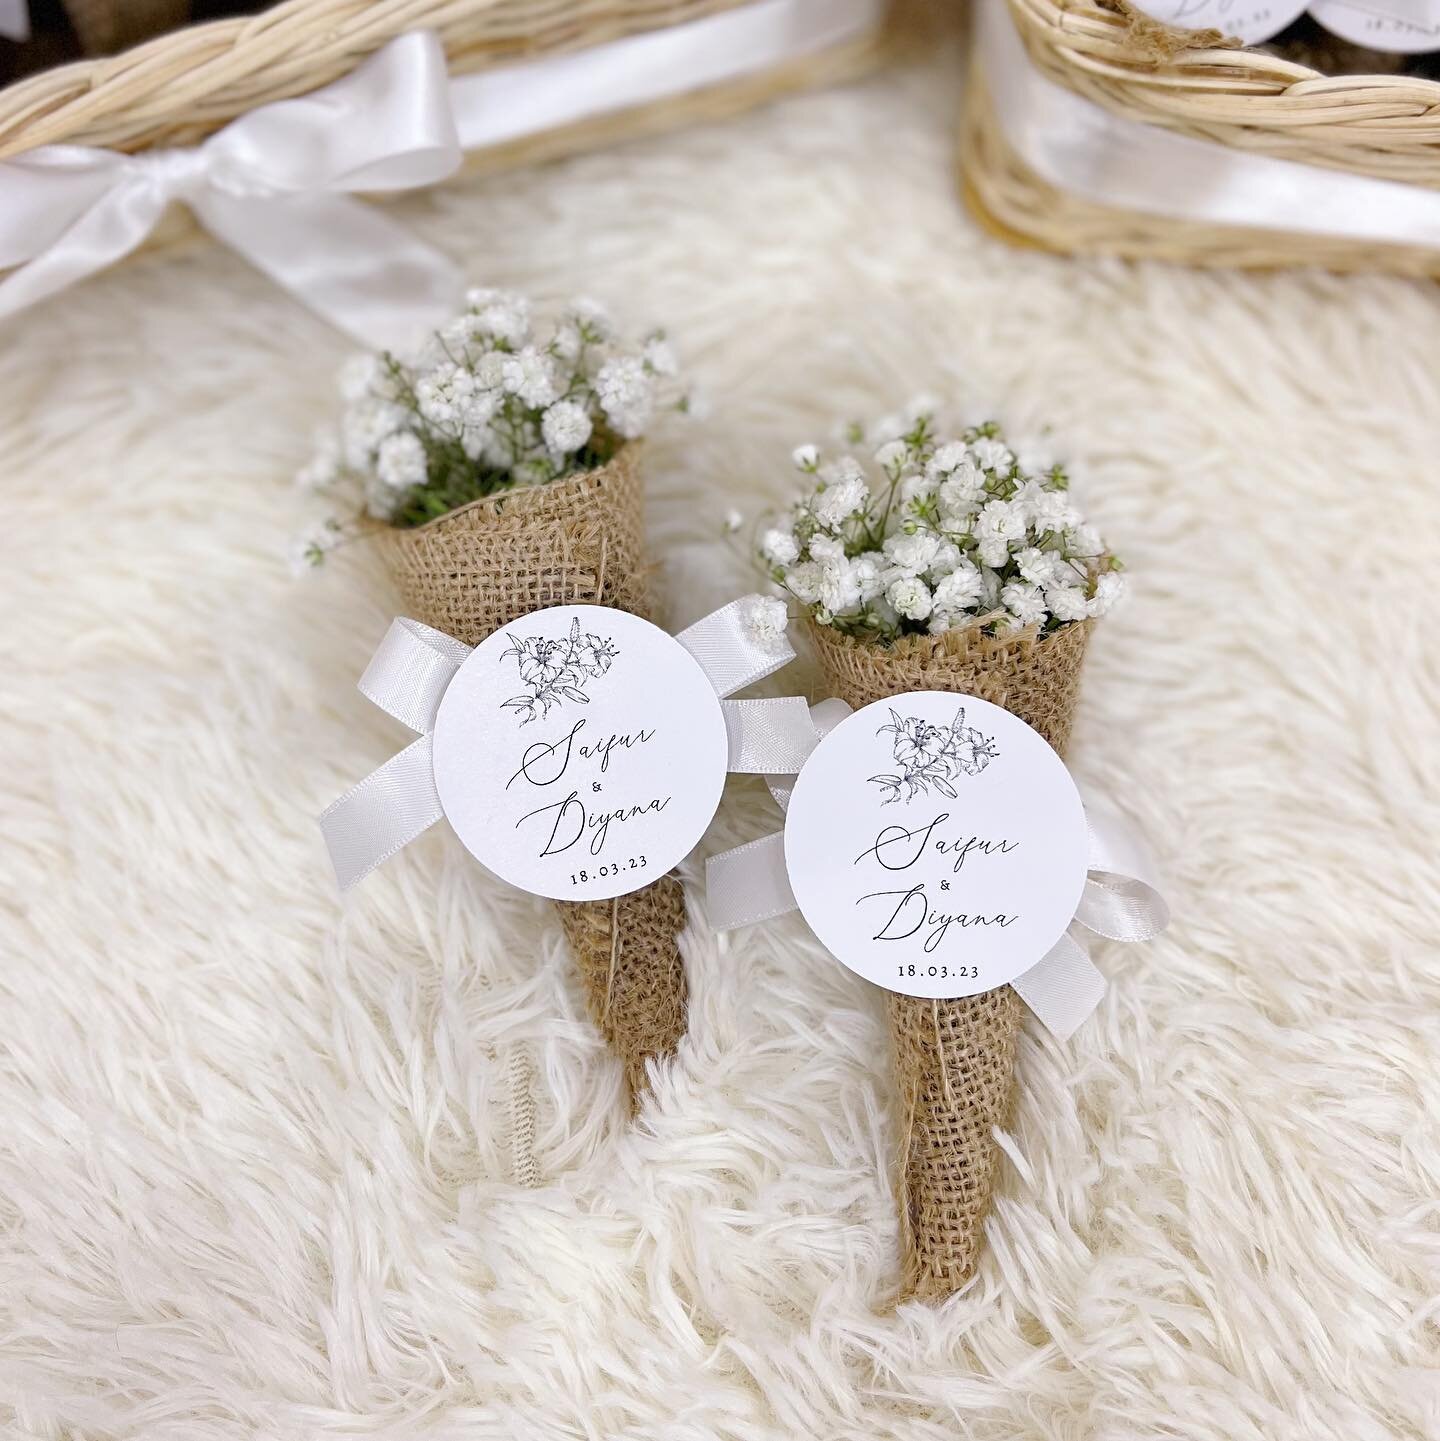 Our signature bunga rampai in rustic burlap cones. Package includes bunga rampai tags, ribbons &amp; woven basket. 

Customisation is always welcomed. Share your ideas with us and we will bring them to life ✨

#soireeblissSG #malayweddingsg #malaywed